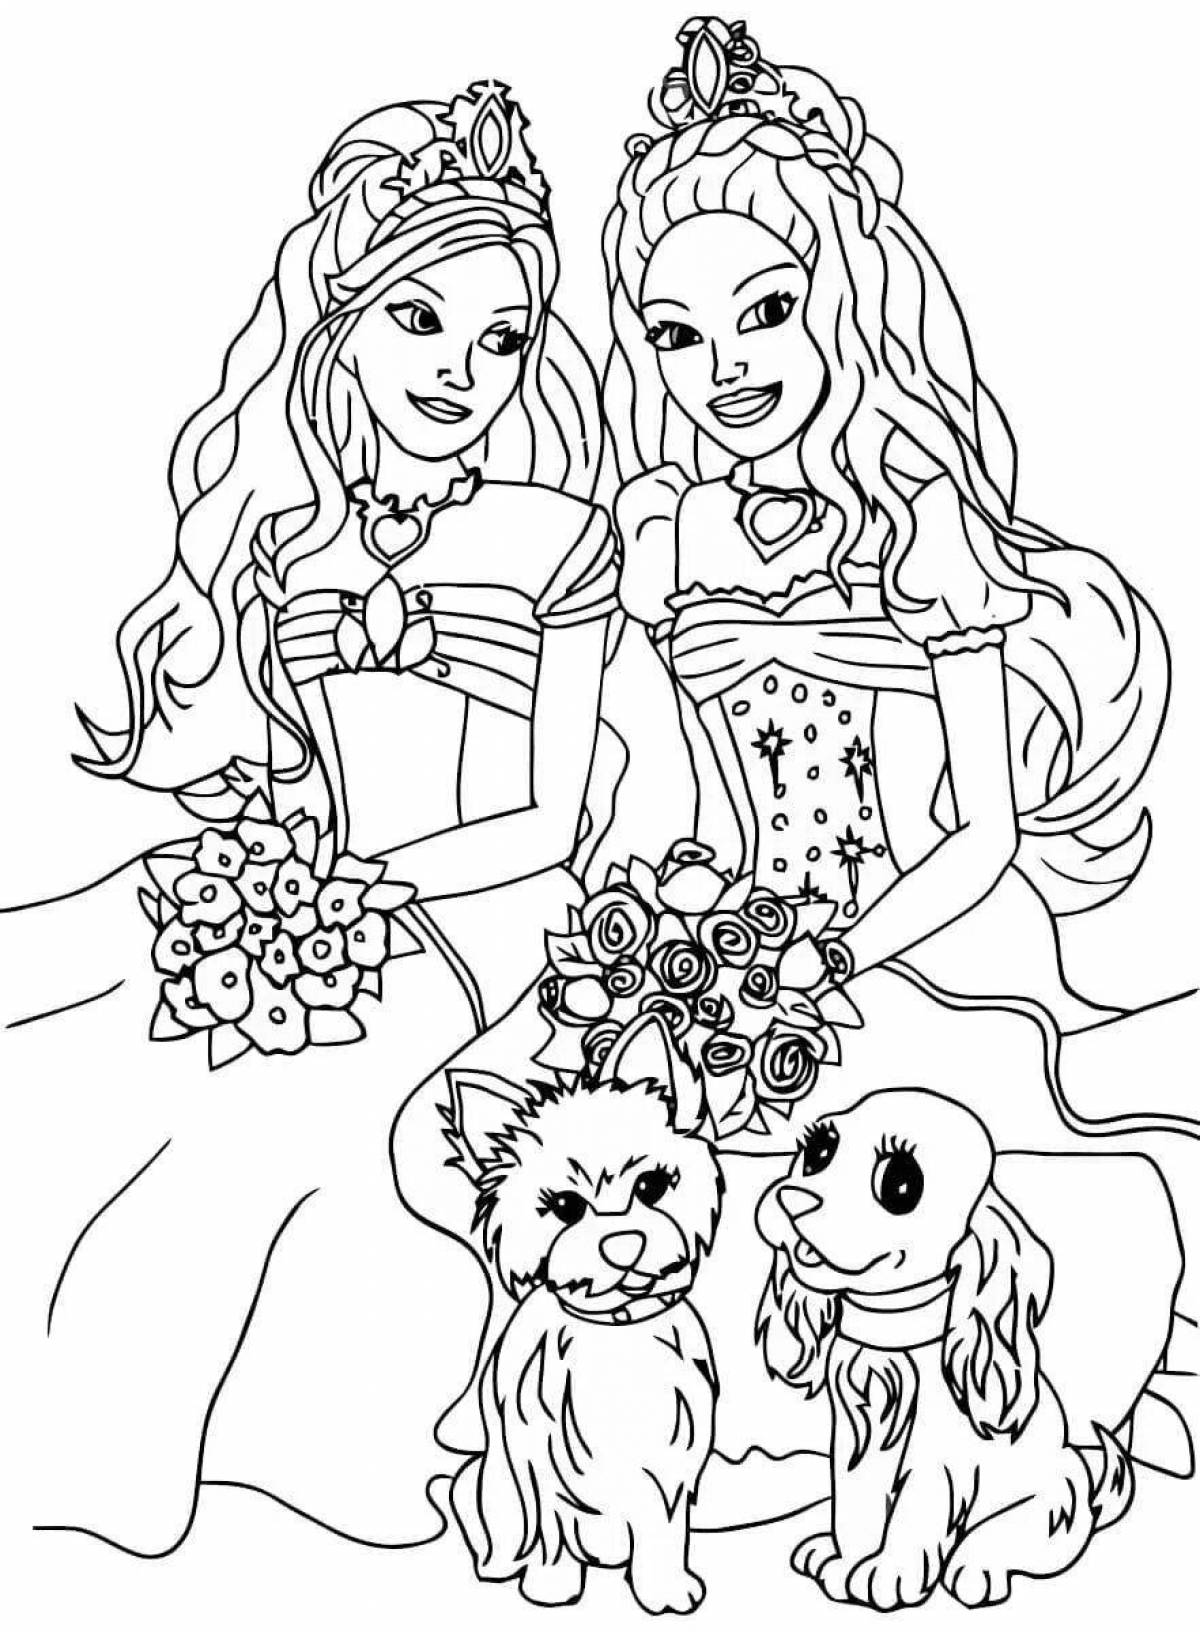 Coloring for girls 9